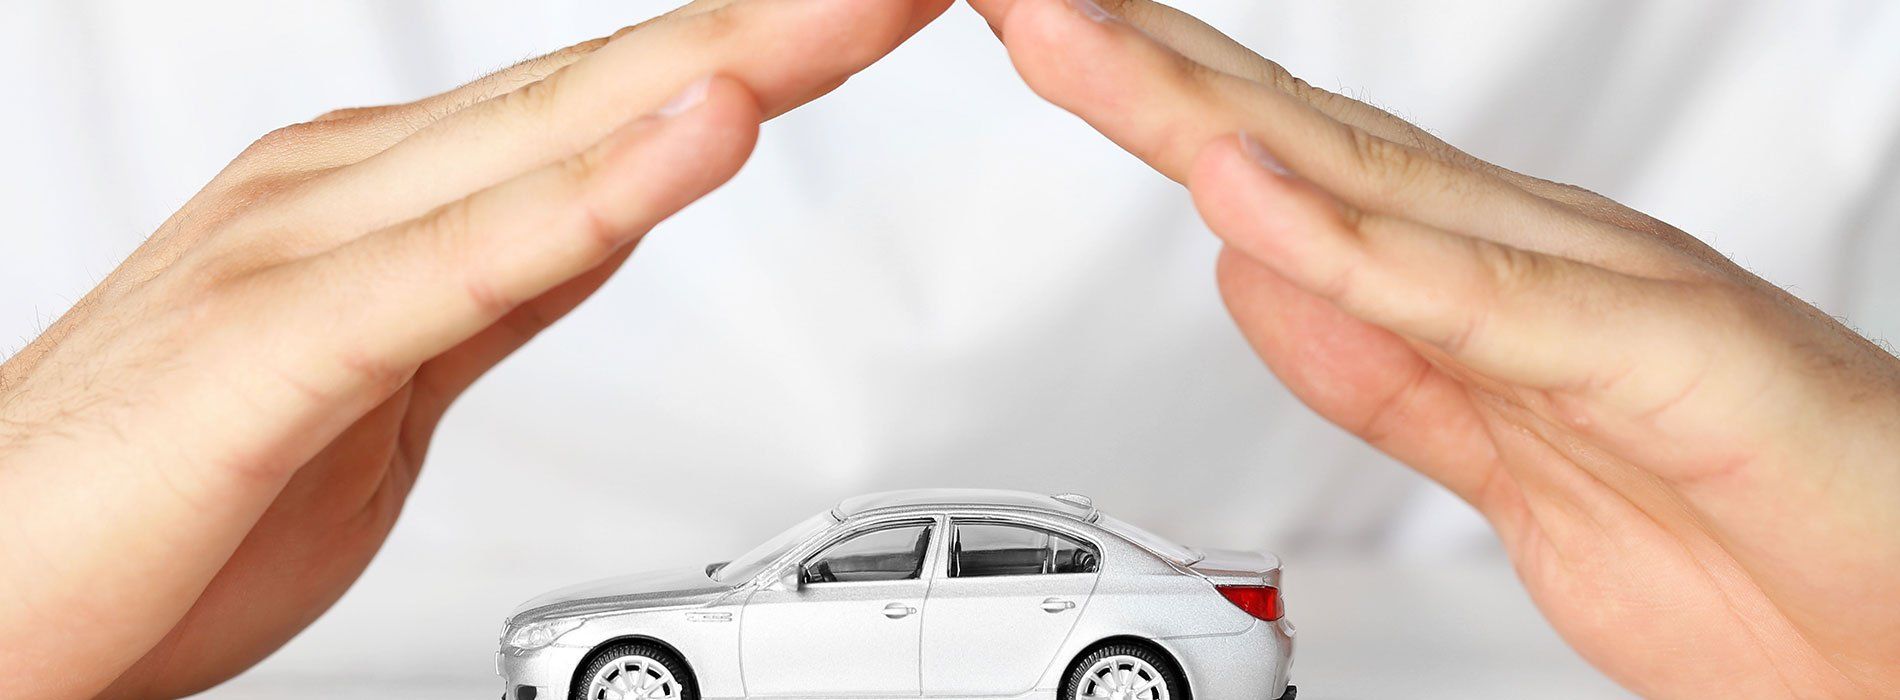 Vehicle Insurance Services